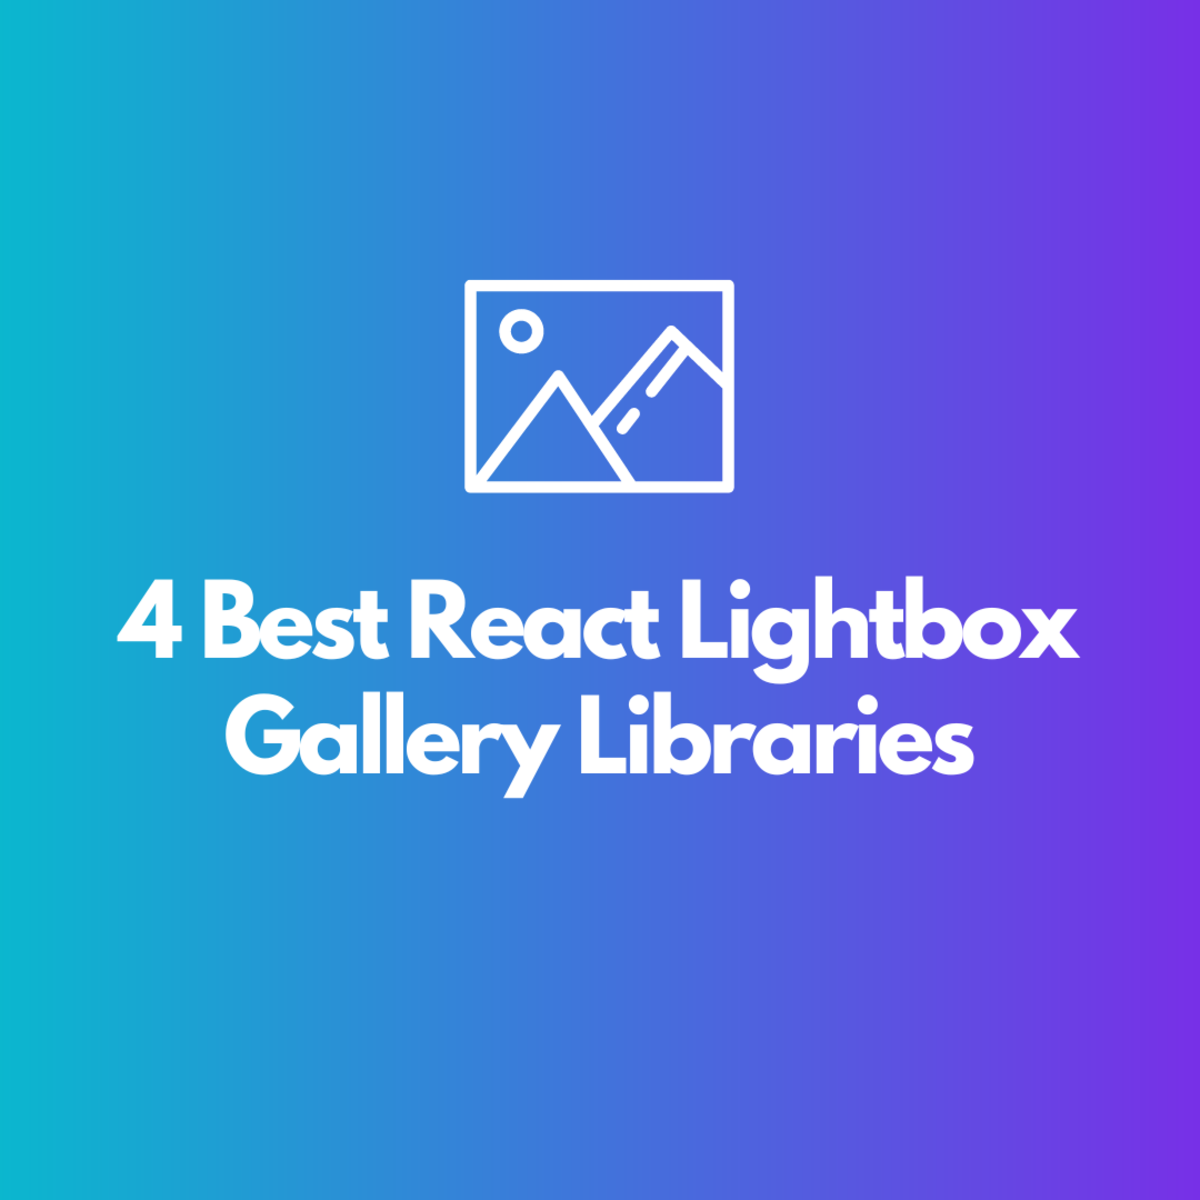 4 React Lightbox Gallery Libraries to Check Out  The Ultimate List - 87